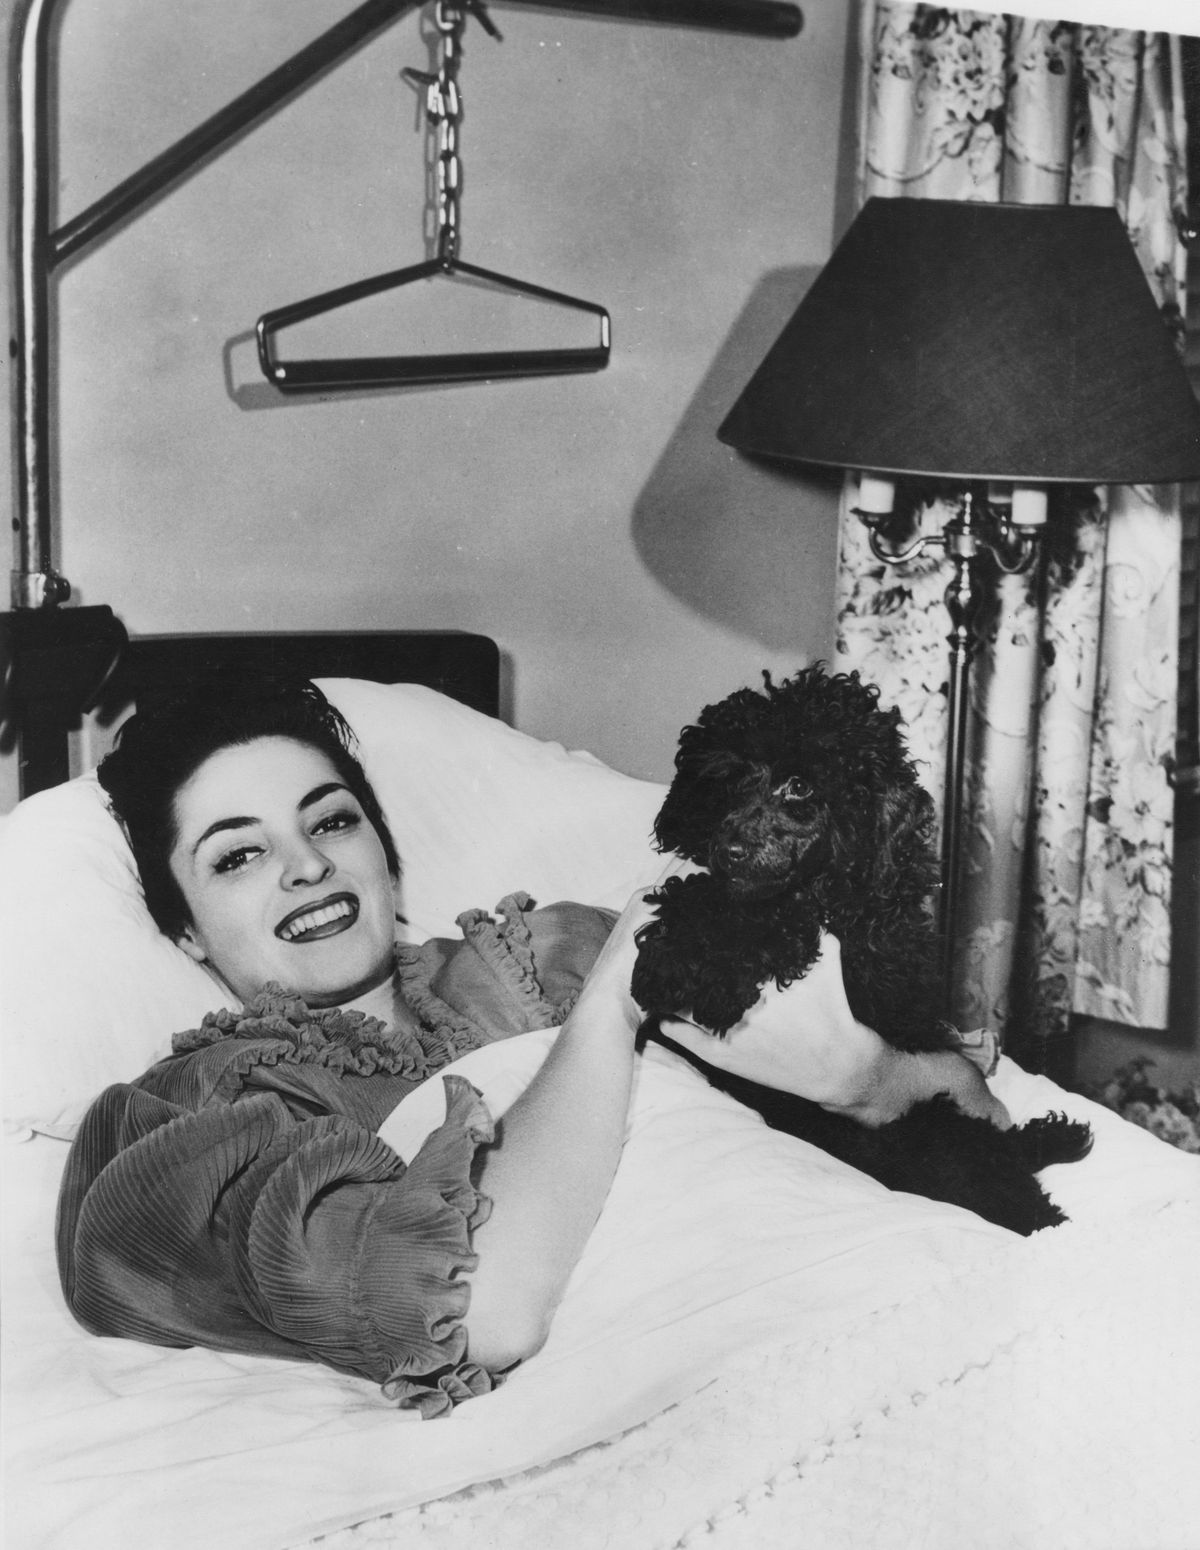 Suzan Ball recovers in hospital after having her leg amputated, in 1954 in Hollywood, California | Photo: Keystone/Hulton Archive/Getty Images